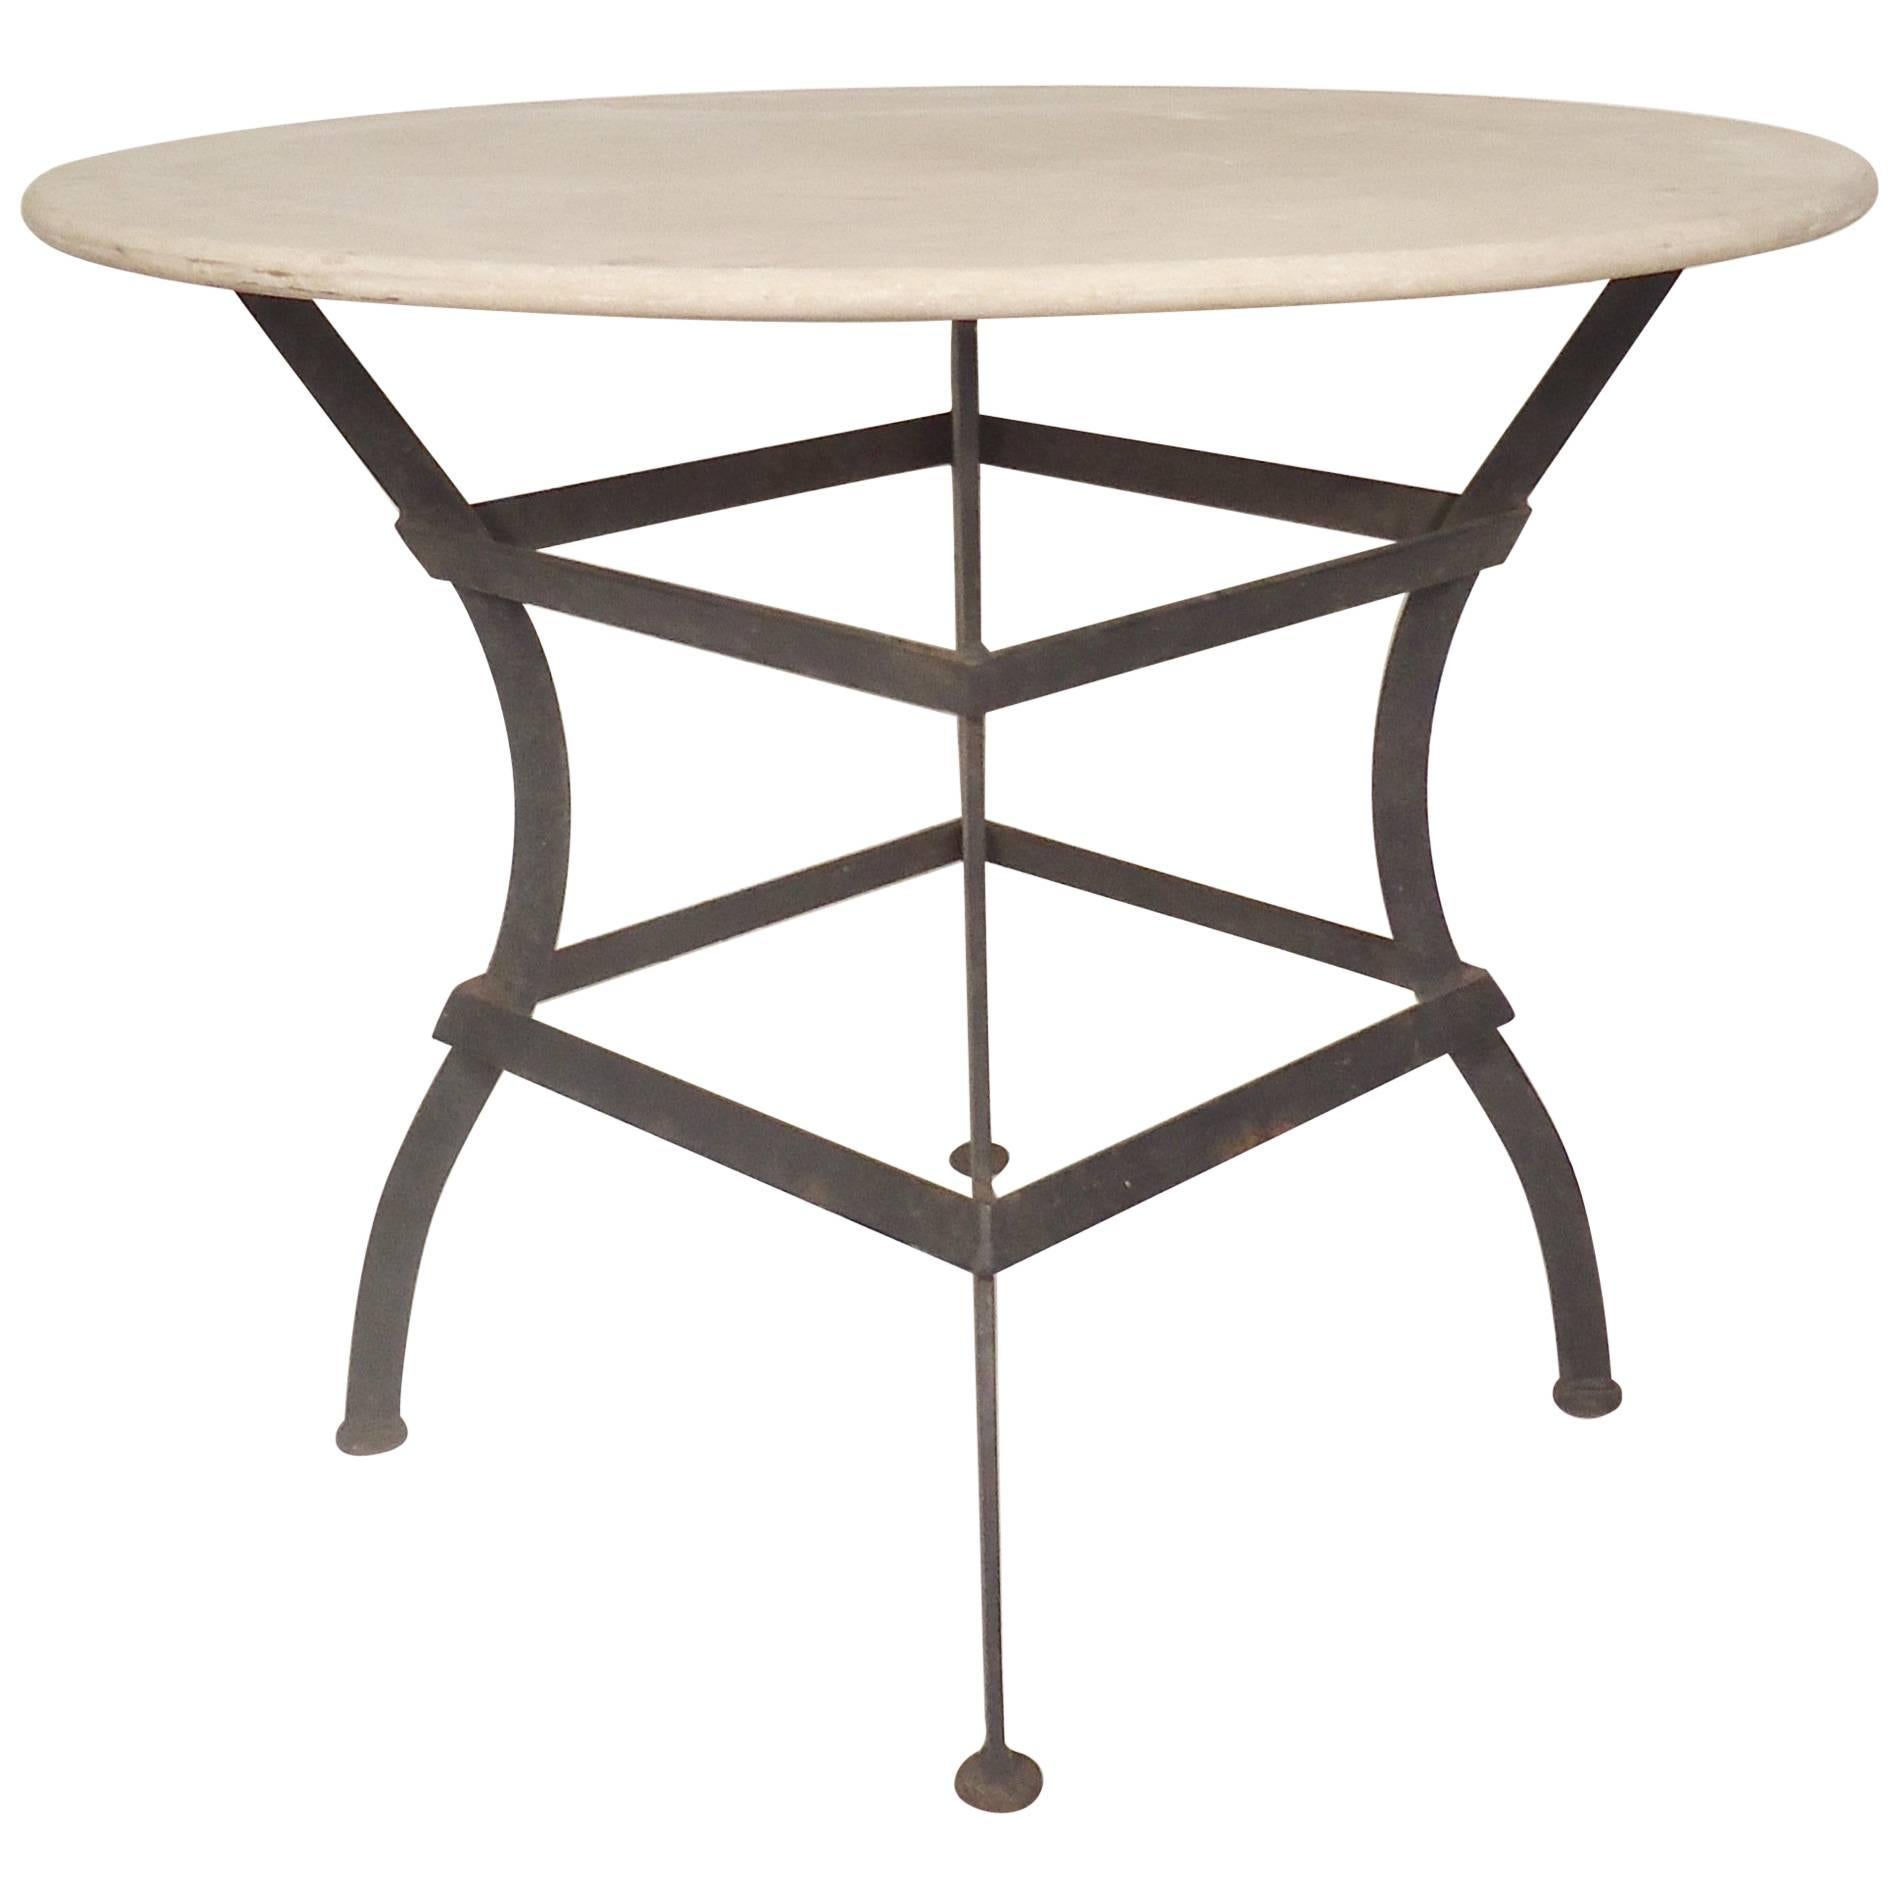 Round Stone Top Dining Table